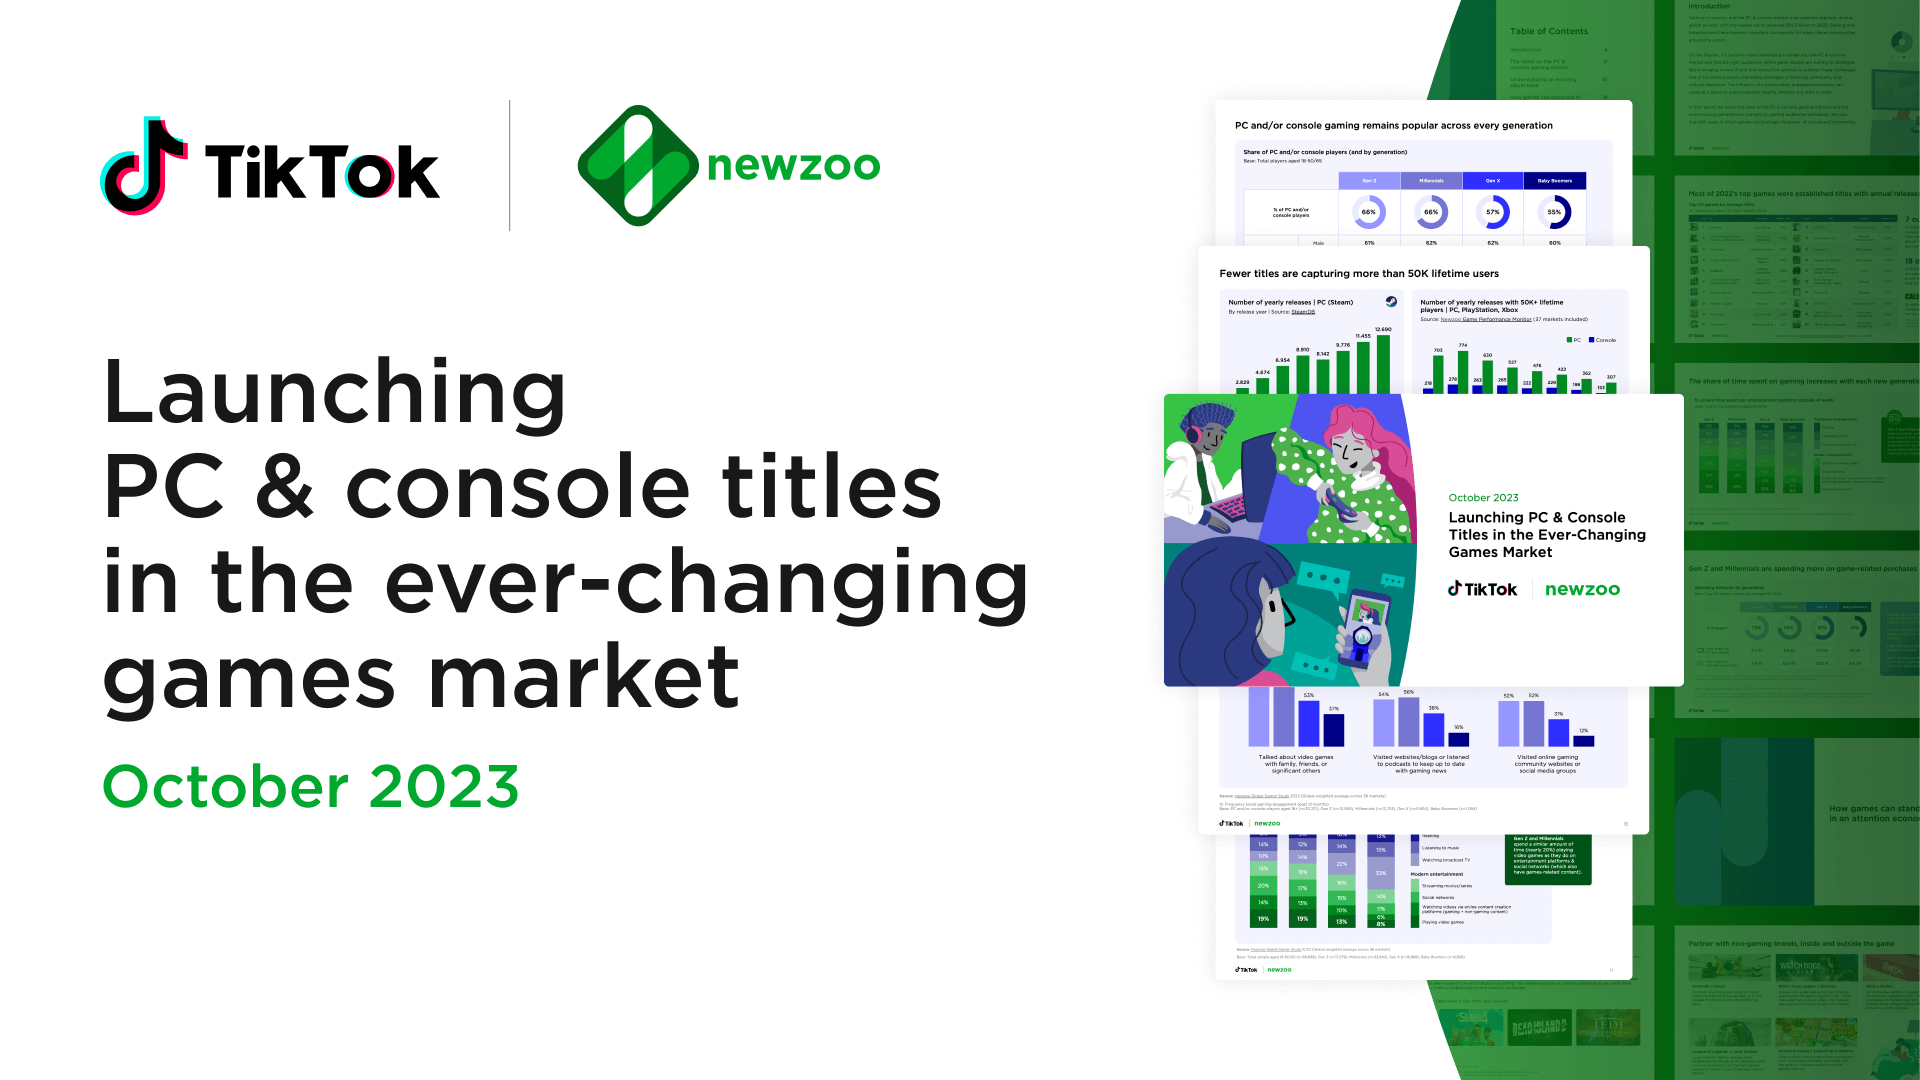 TikTok x Newzoo report: Launching PC & console titles in the ever-changing games market